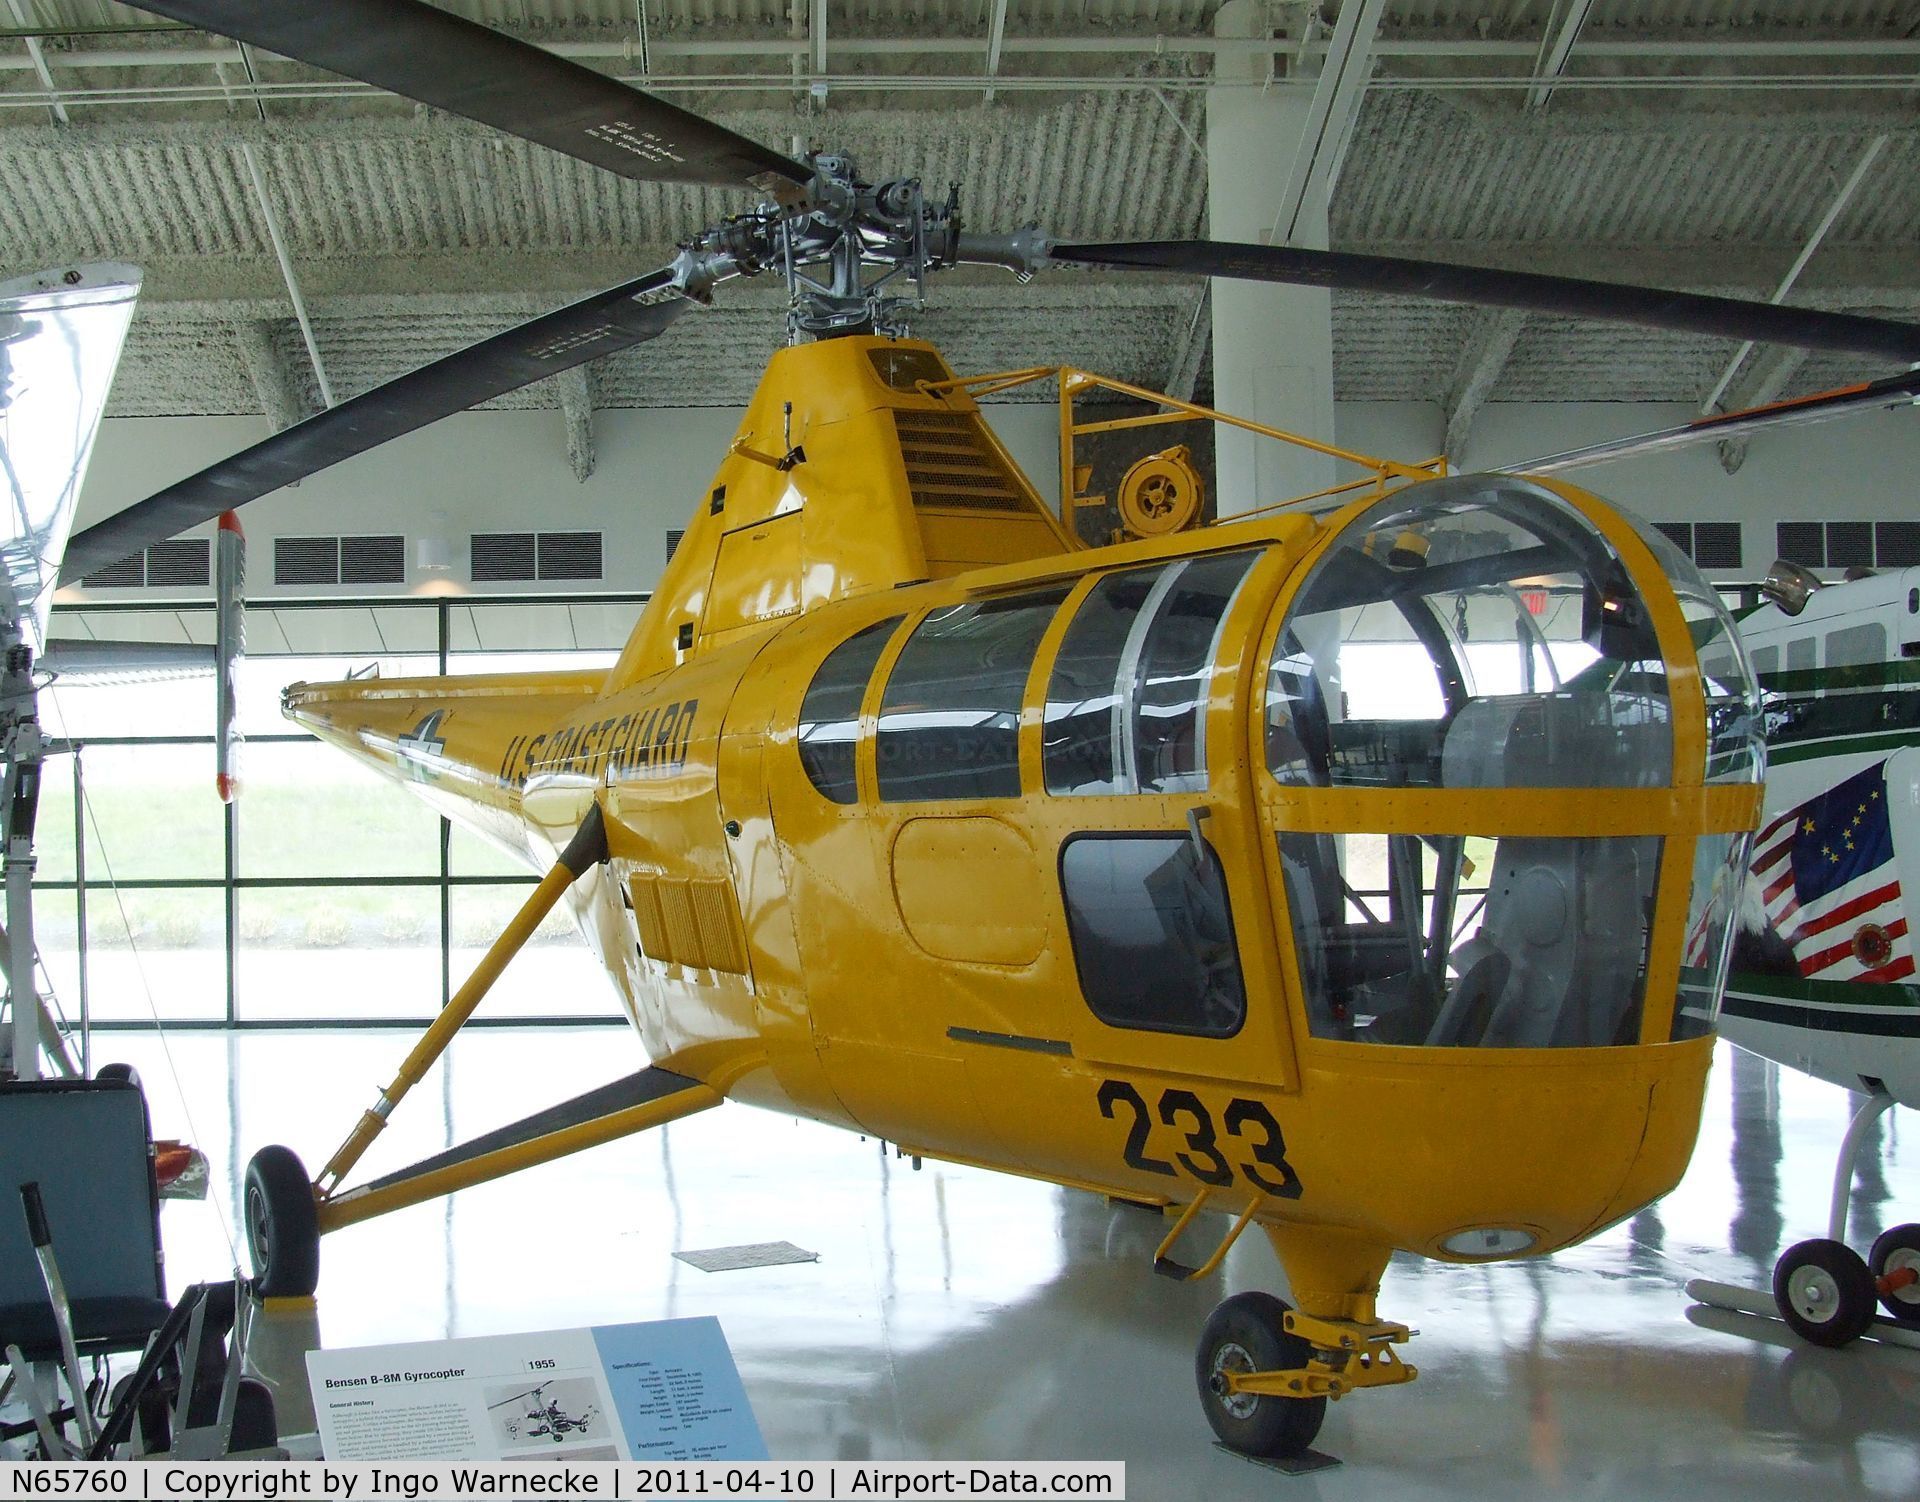 N65760, Sikorsky S-51 C/N 5105, Sikorsky S-51 at the Evergreen Aviation & Space Museum, McMinnville OR